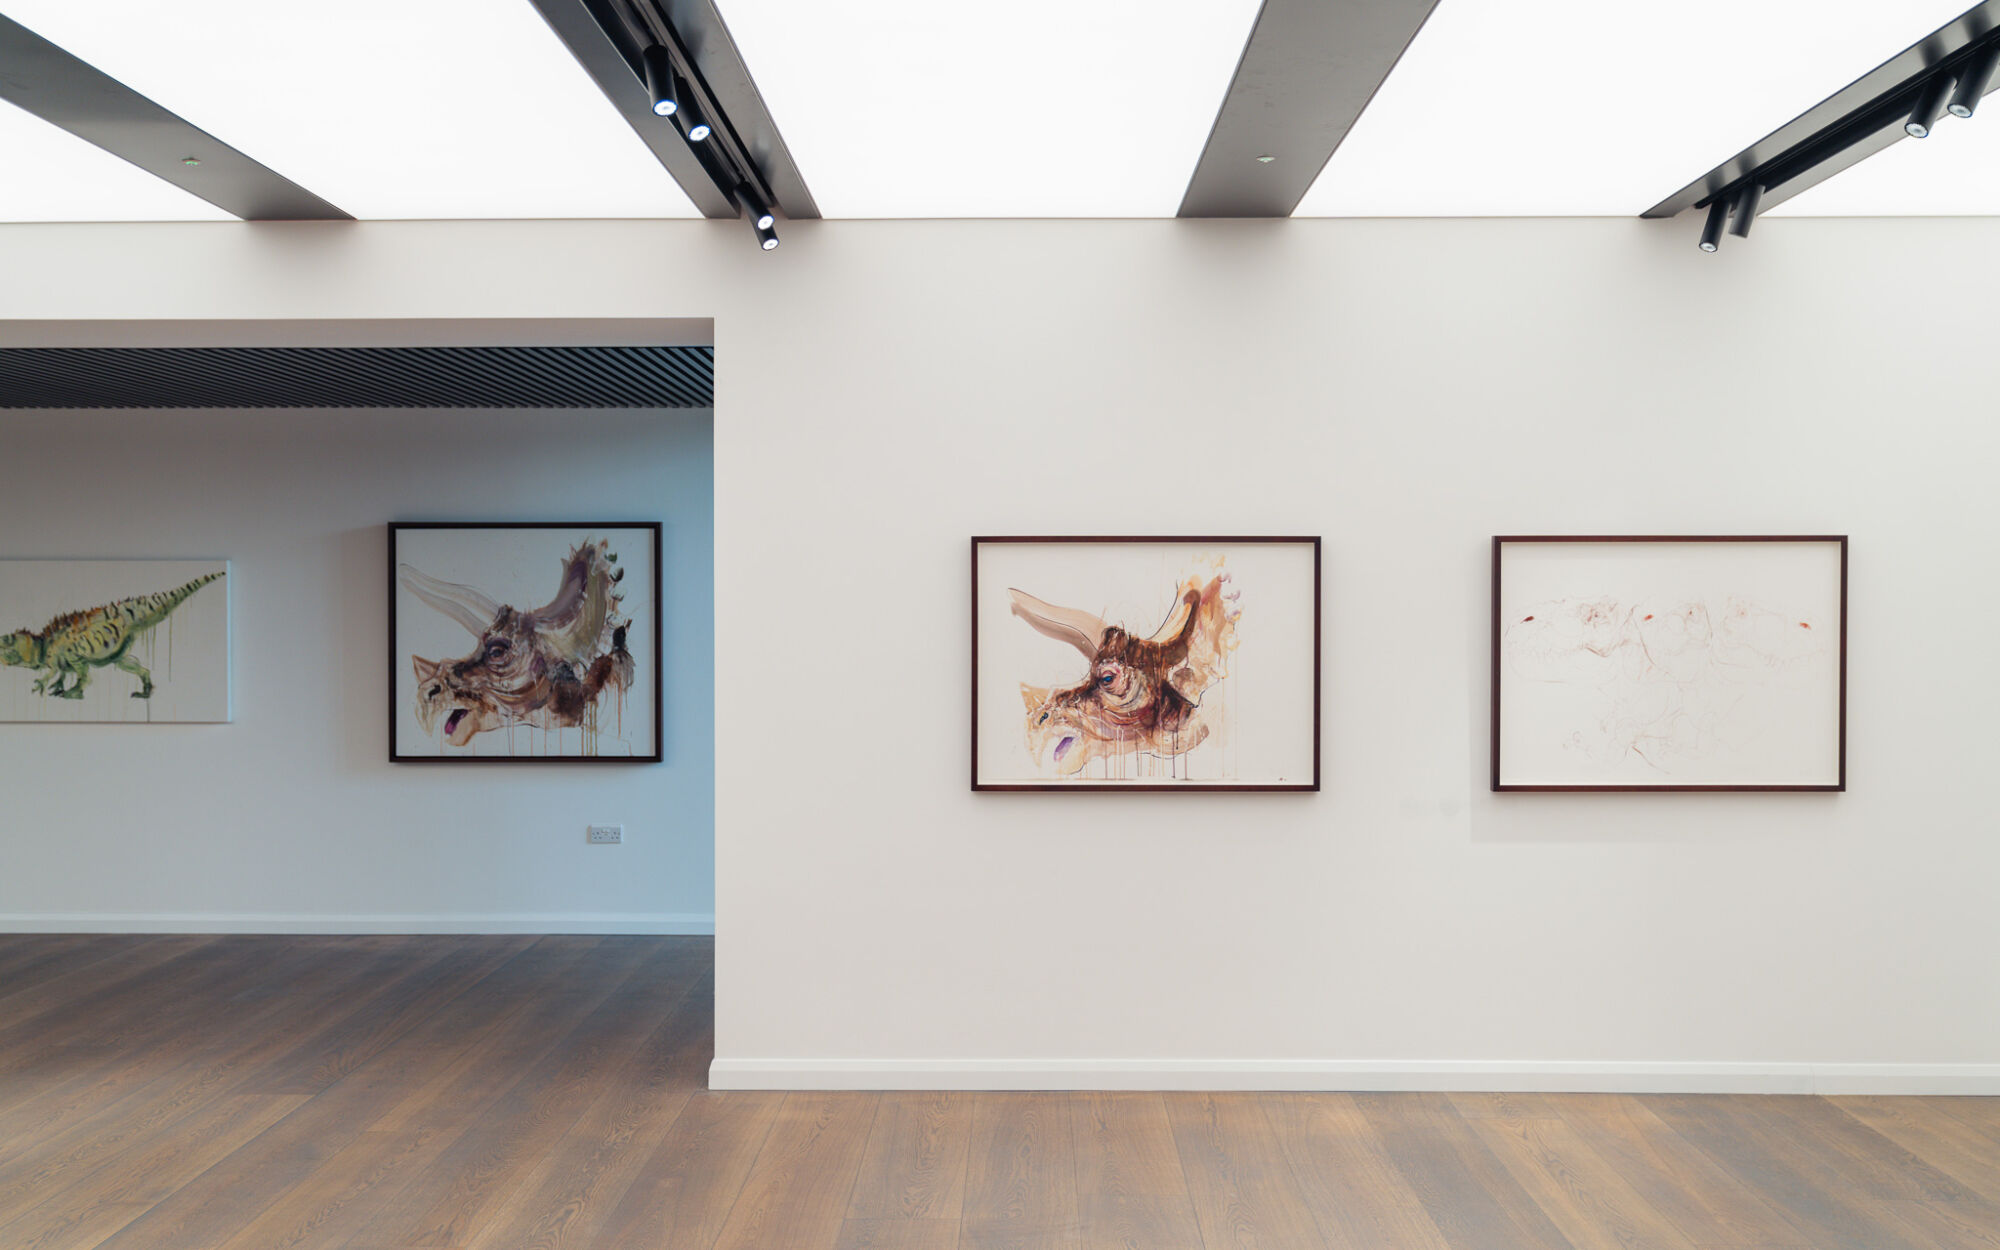 The Wick - 'Dave White: Extinct' at Kiklo Spaces, photographer: Henry Wood, courtesy of Loughran Gallery 